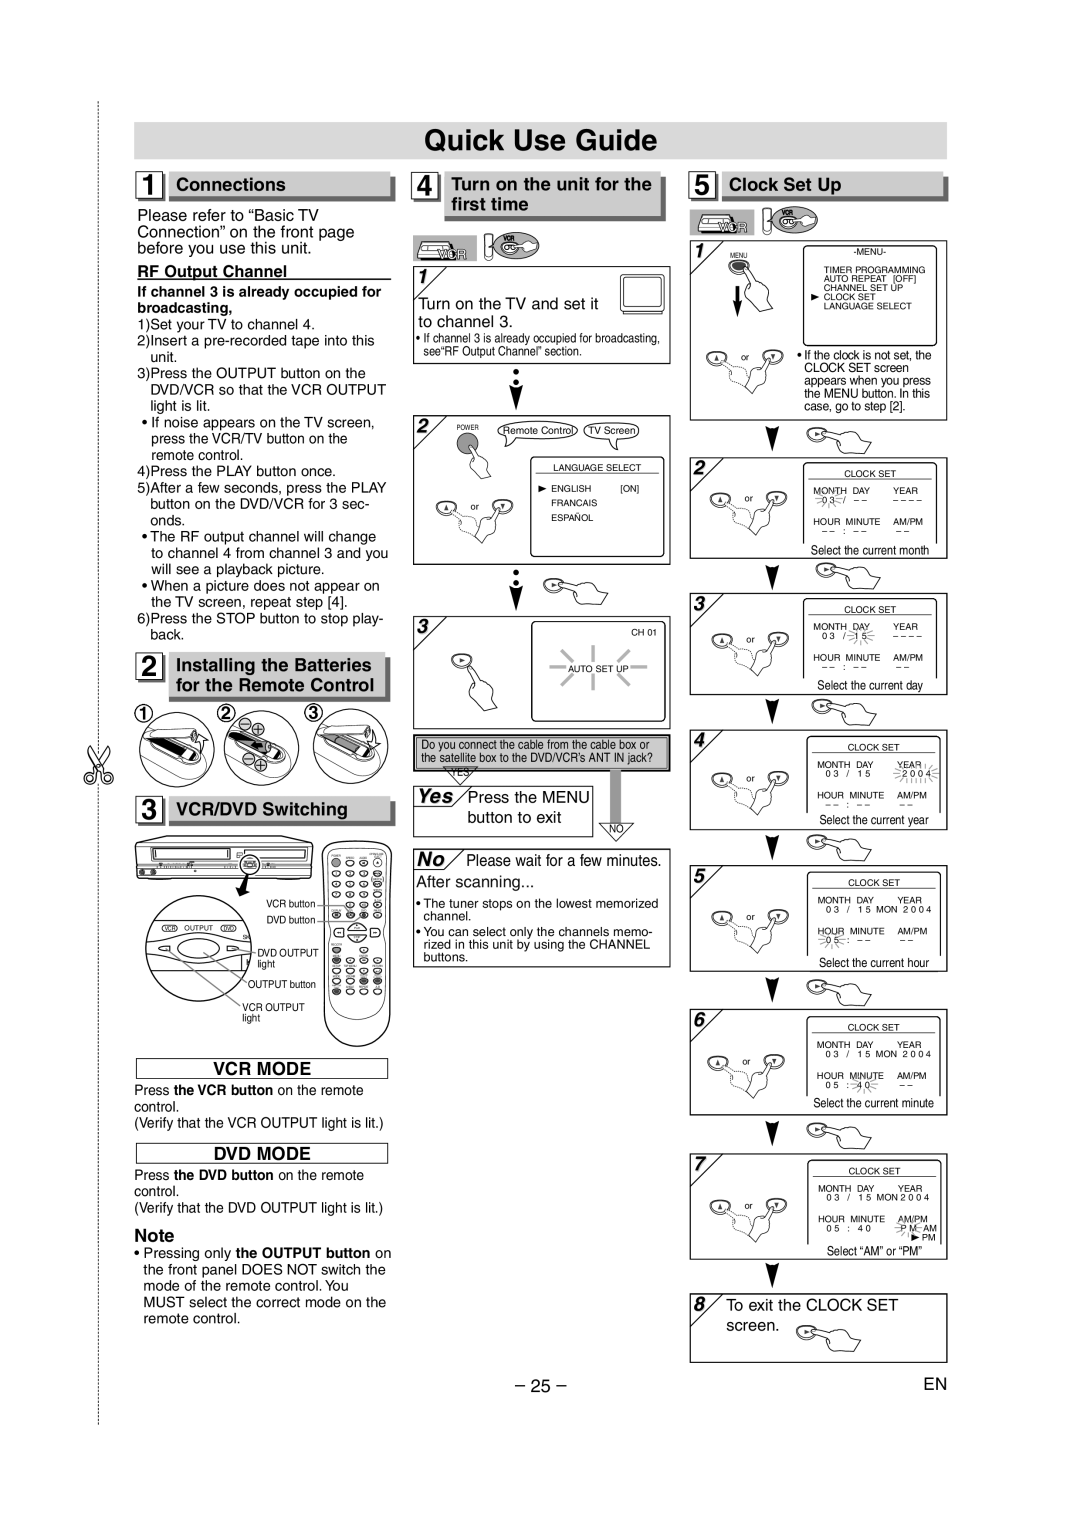 Symphonic CSDV840E Quick Use Guide, Connections, Installing the Batteries, For the Remote Control, VCR/DVD Switching 